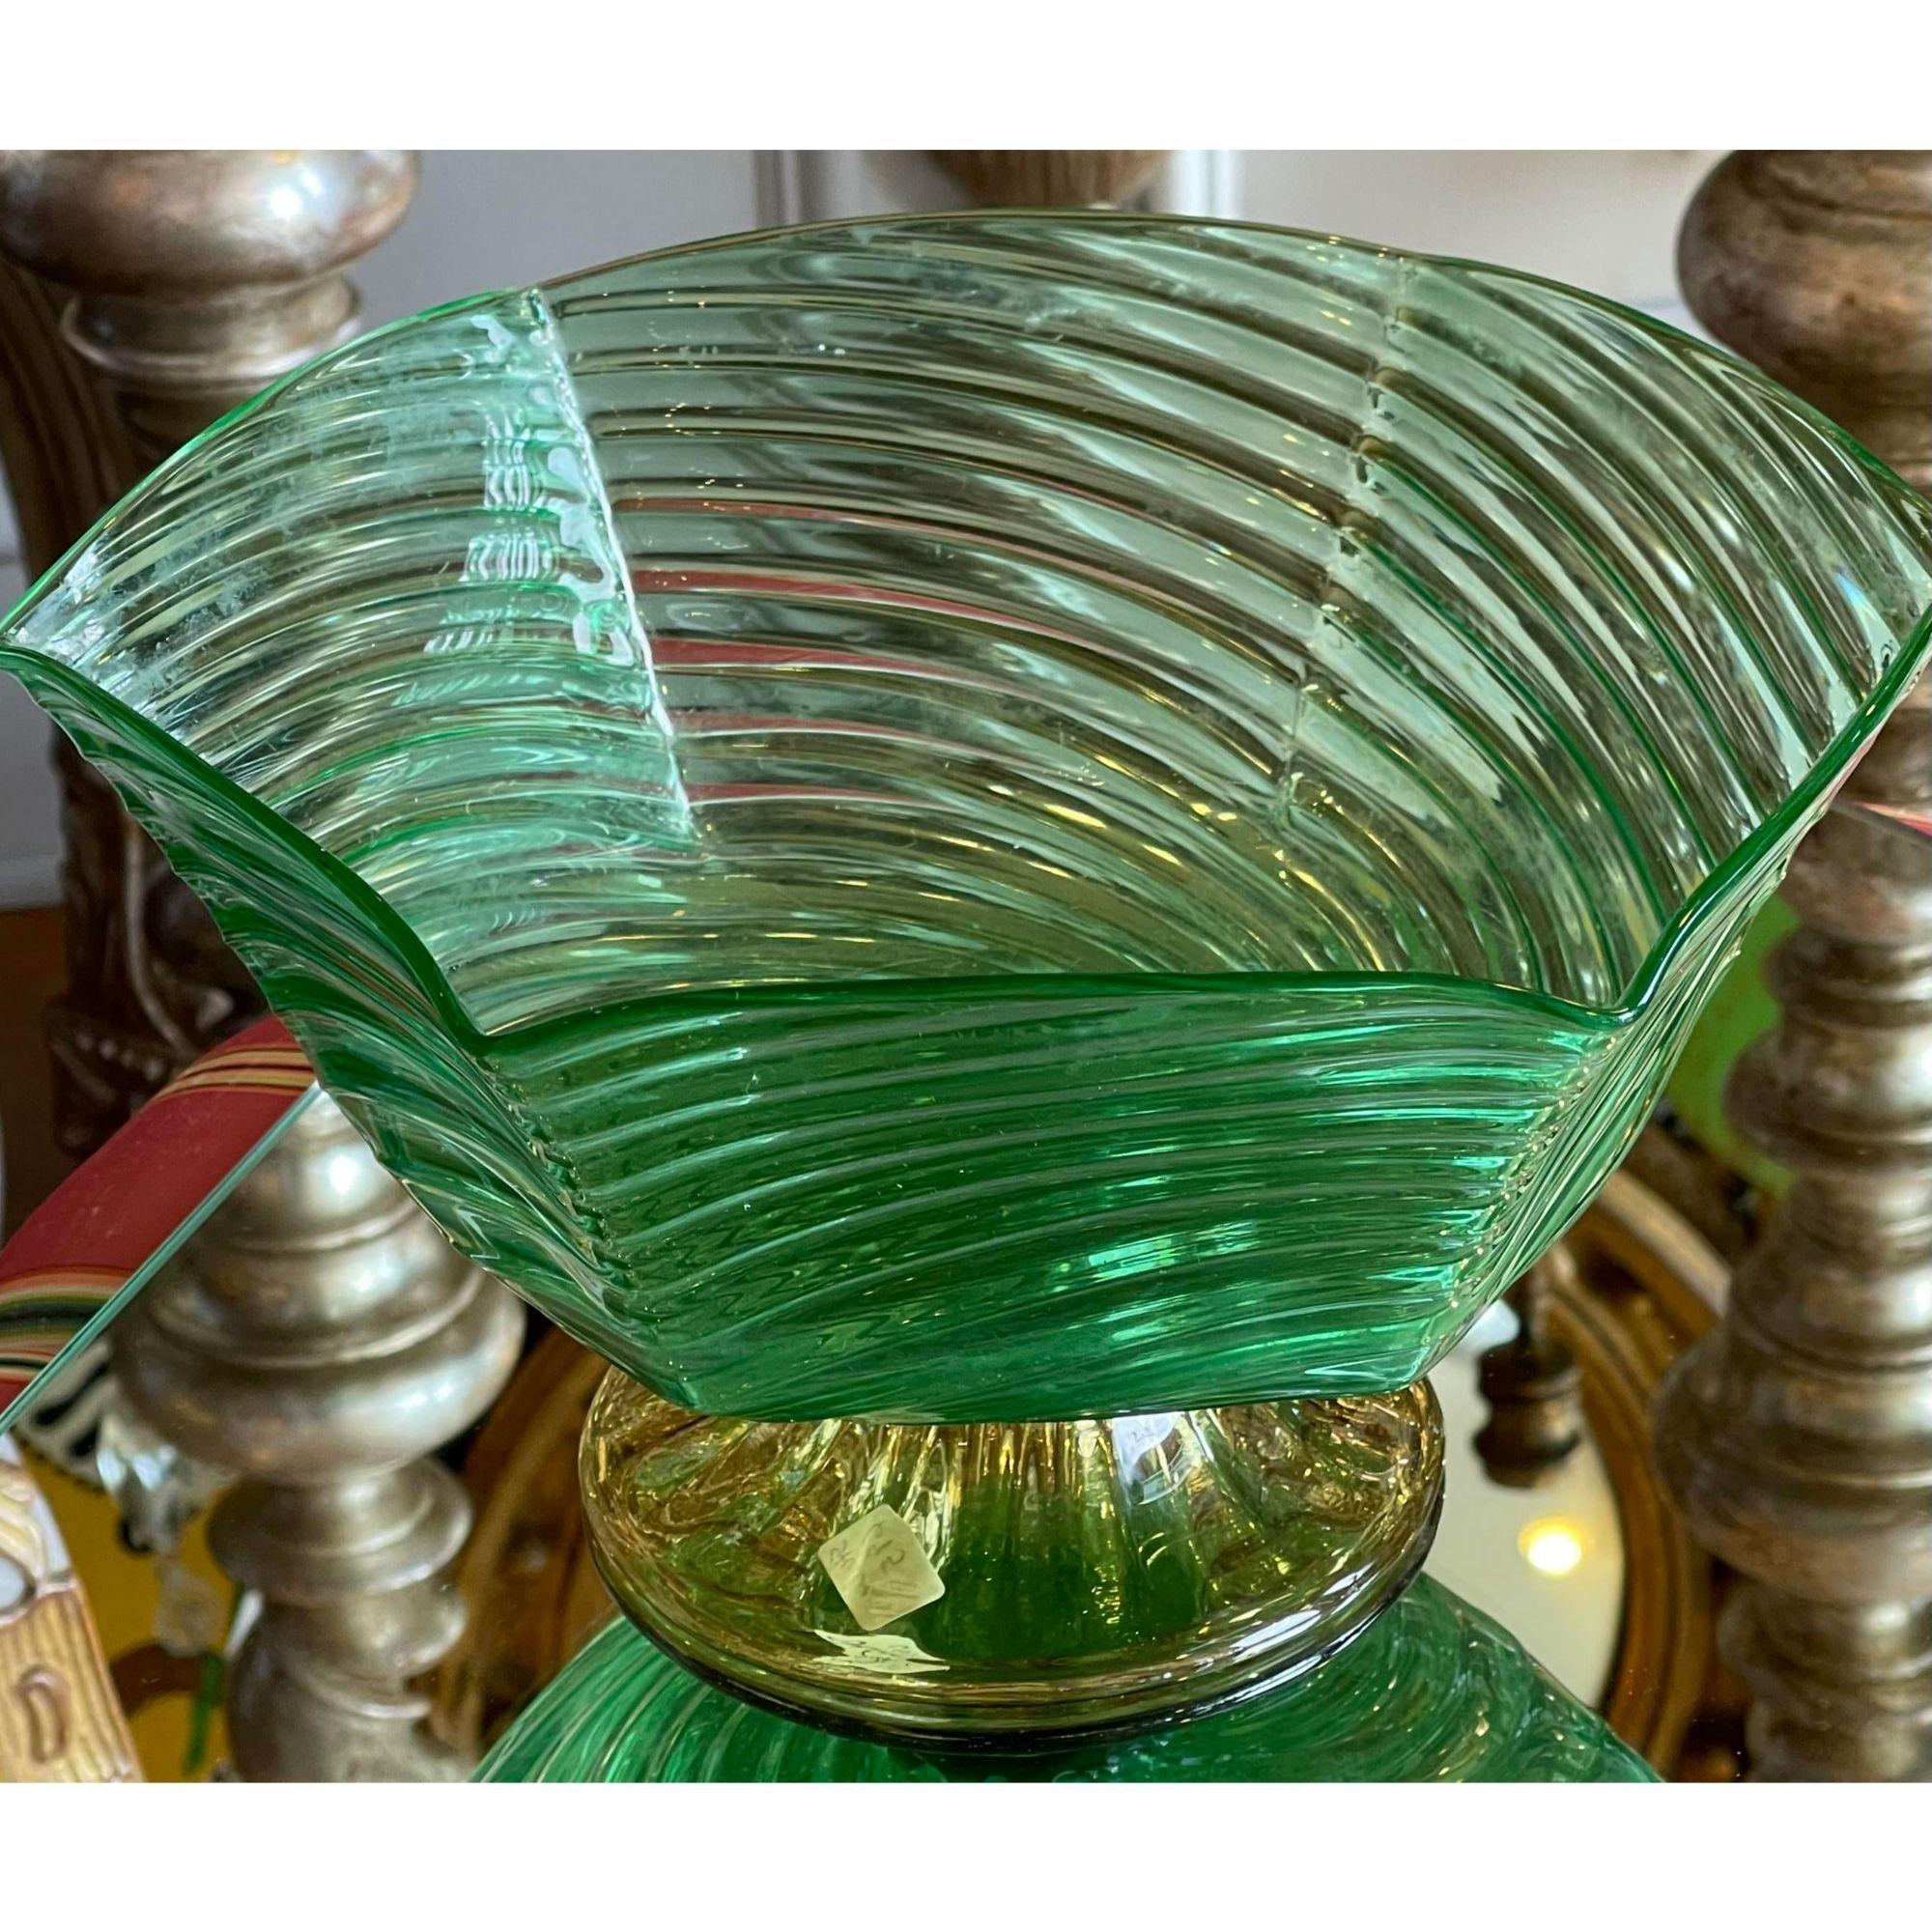 1930s Frederick Carder for Steuben Pomona green and yellow glass centerpiece bowl.

Additional information: 
Materials : Glass.
Color : Green.
Brand : Steuben glass
Period : 1930s.
Styles : Art Deco, Modern.
Item Type: Vintage, antique or